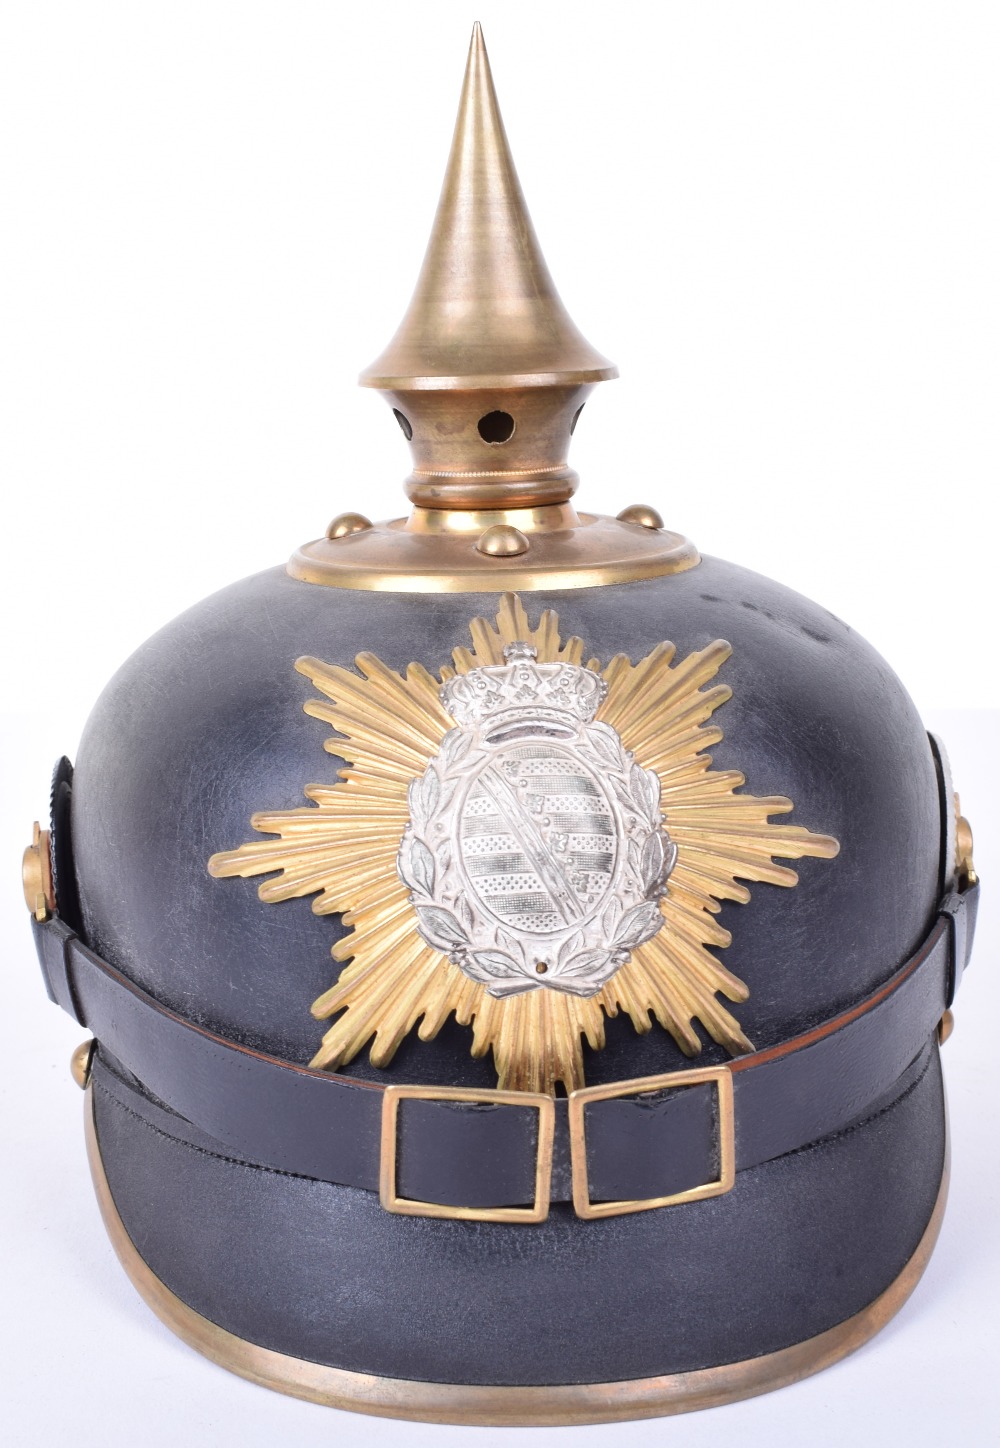 Saxon One Year Volunteer Pickelhaube with Original Trench Cover - Image 7 of 18